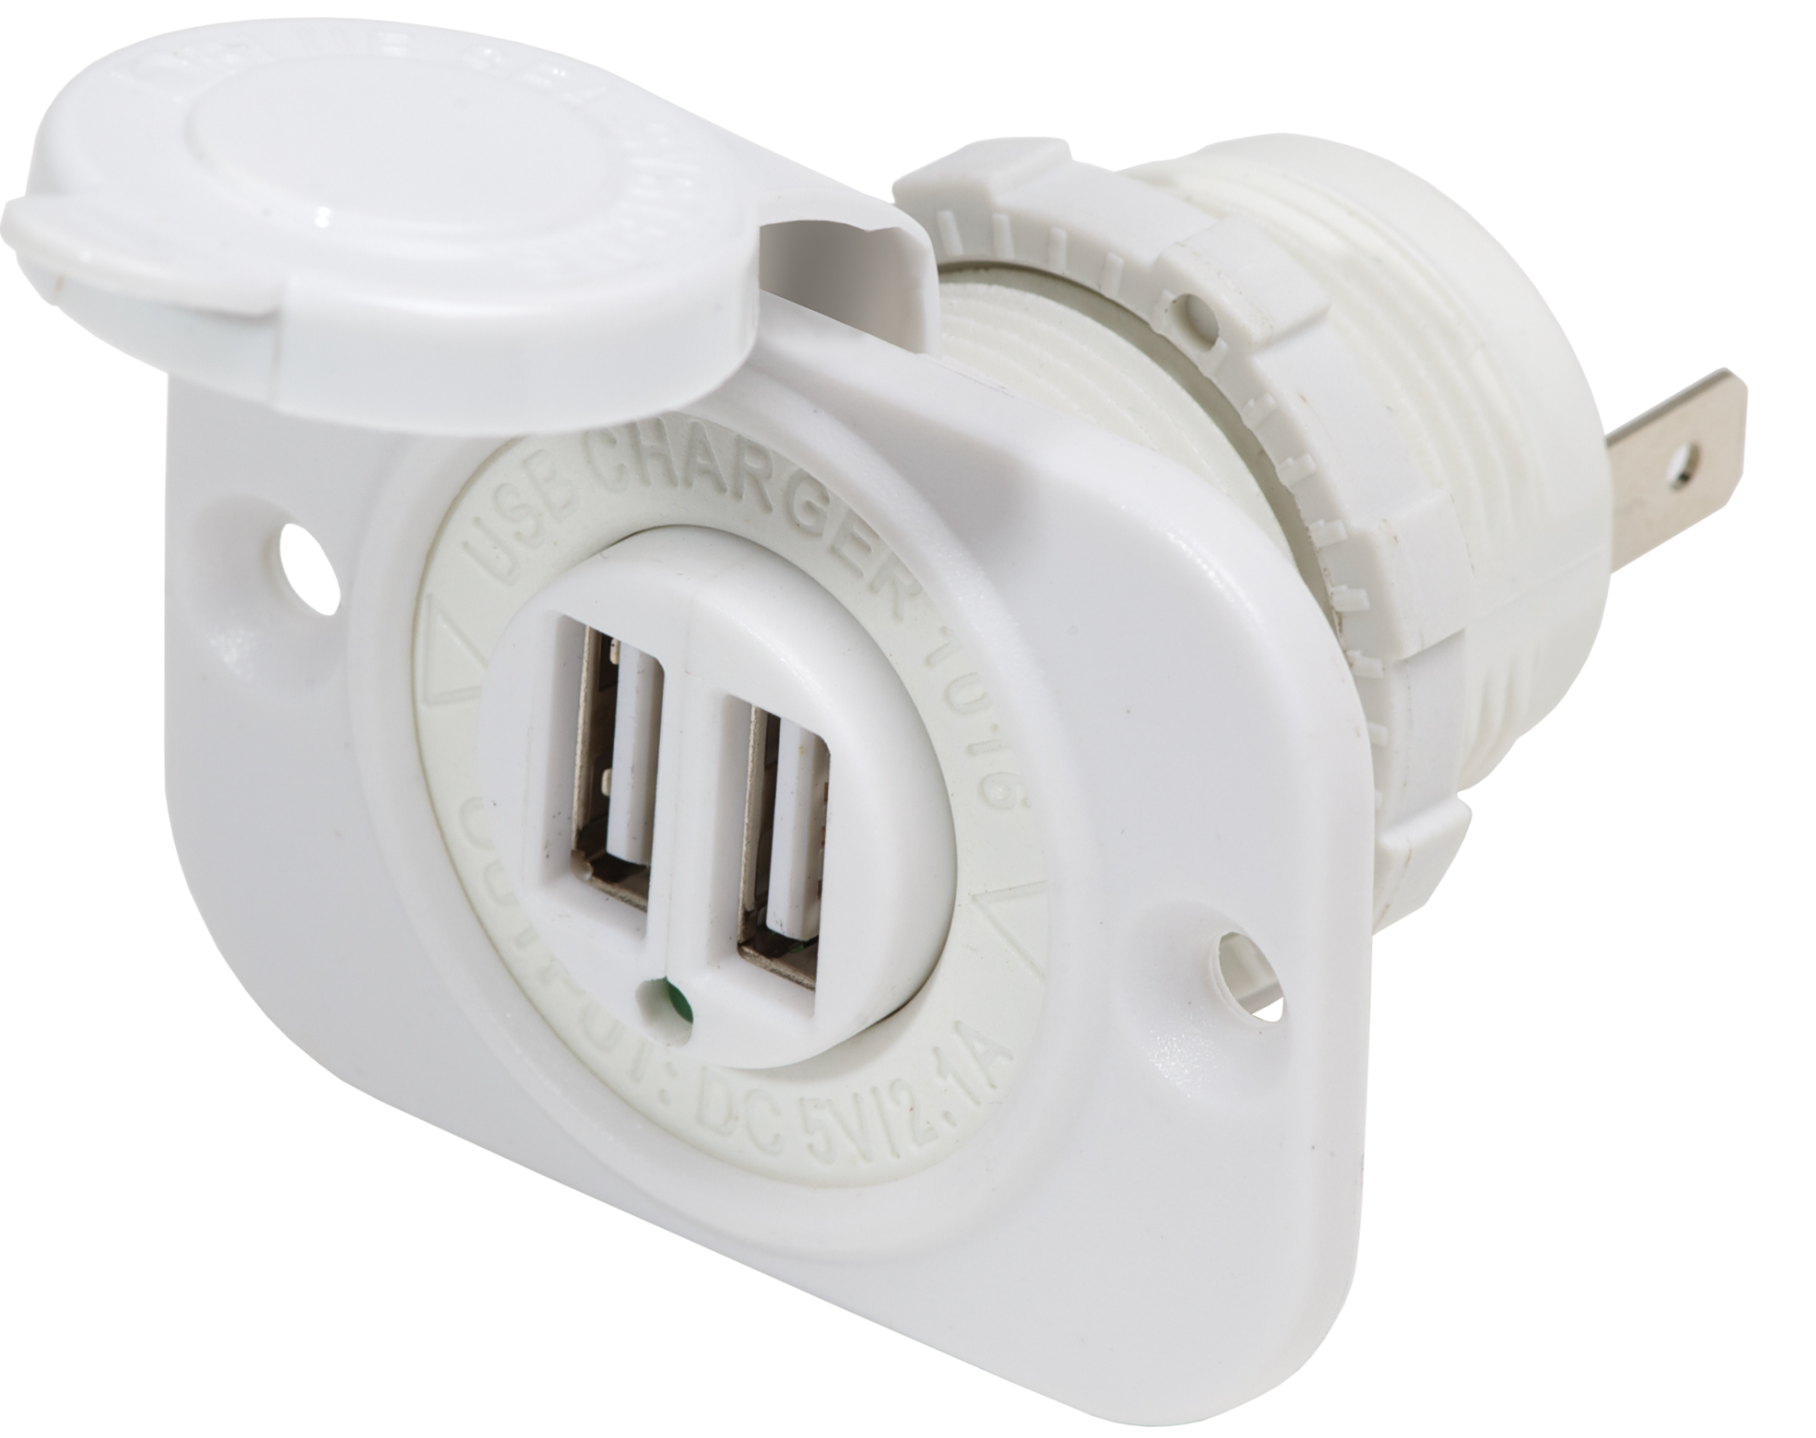 12/24V Dual USB 2.1A Charger - White